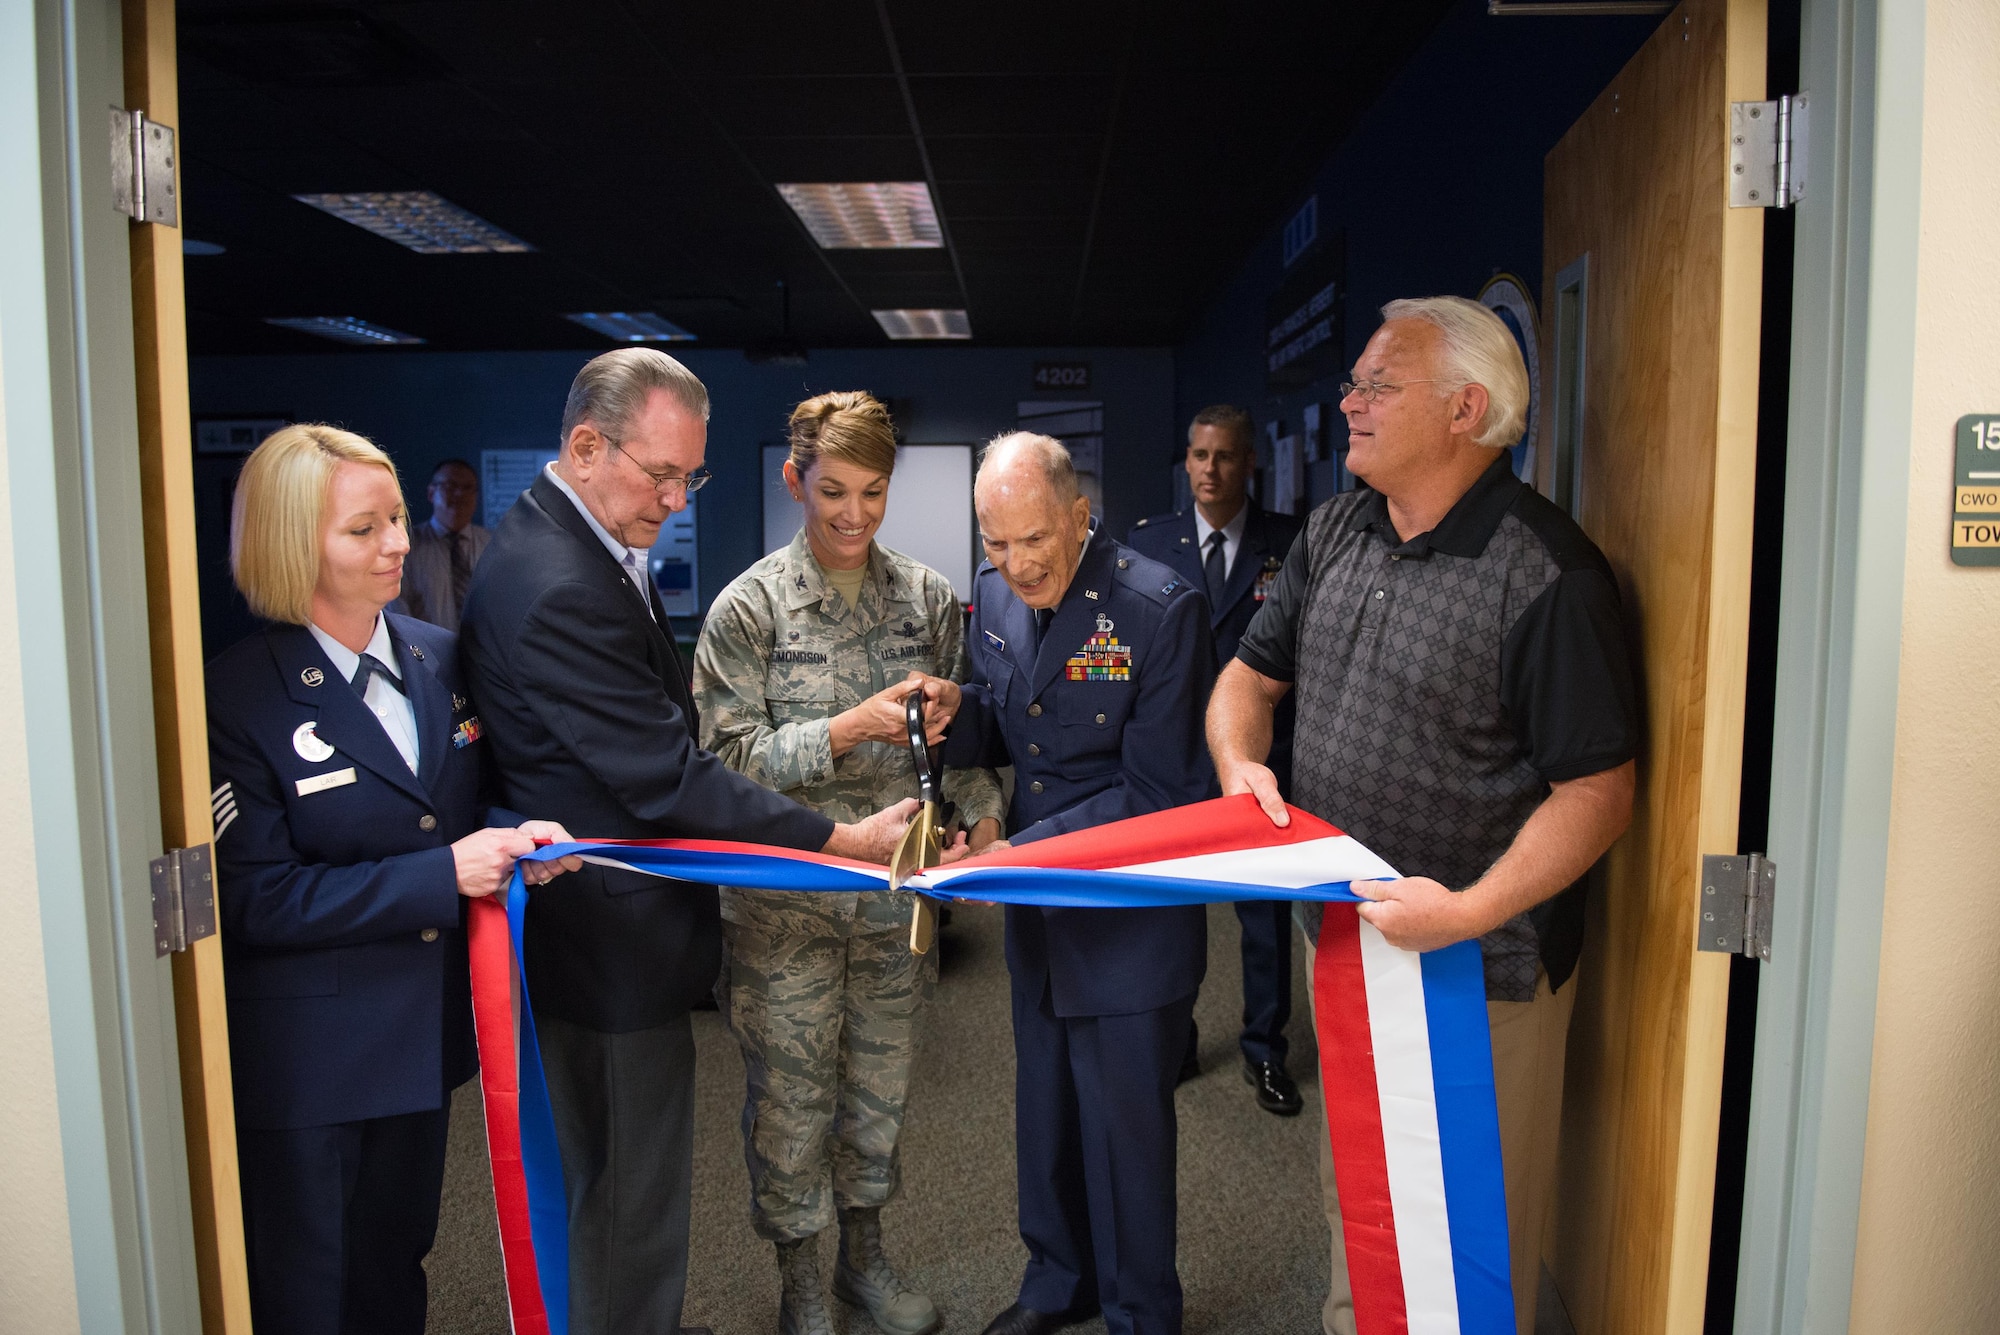 Retired Chief Master Sgt. J.J. Vollmuth; Col. Michele Edmondson, 81st Training Wing commander; and Retired Chief Warrant Officer 4 Francis Herbert cut a ribbon during a ceremony in Cody Hall April 26, 2016, Keesler Air Force Base, Miss. A room was dedicated to Herbert for his 50 years of service in air traffic control in the Army, Army Air Corps, and Air Force from 1942-1972, then as a Keesler civilian instructor for 20 years. (U.S. Air Force photo by Marie Floyd)